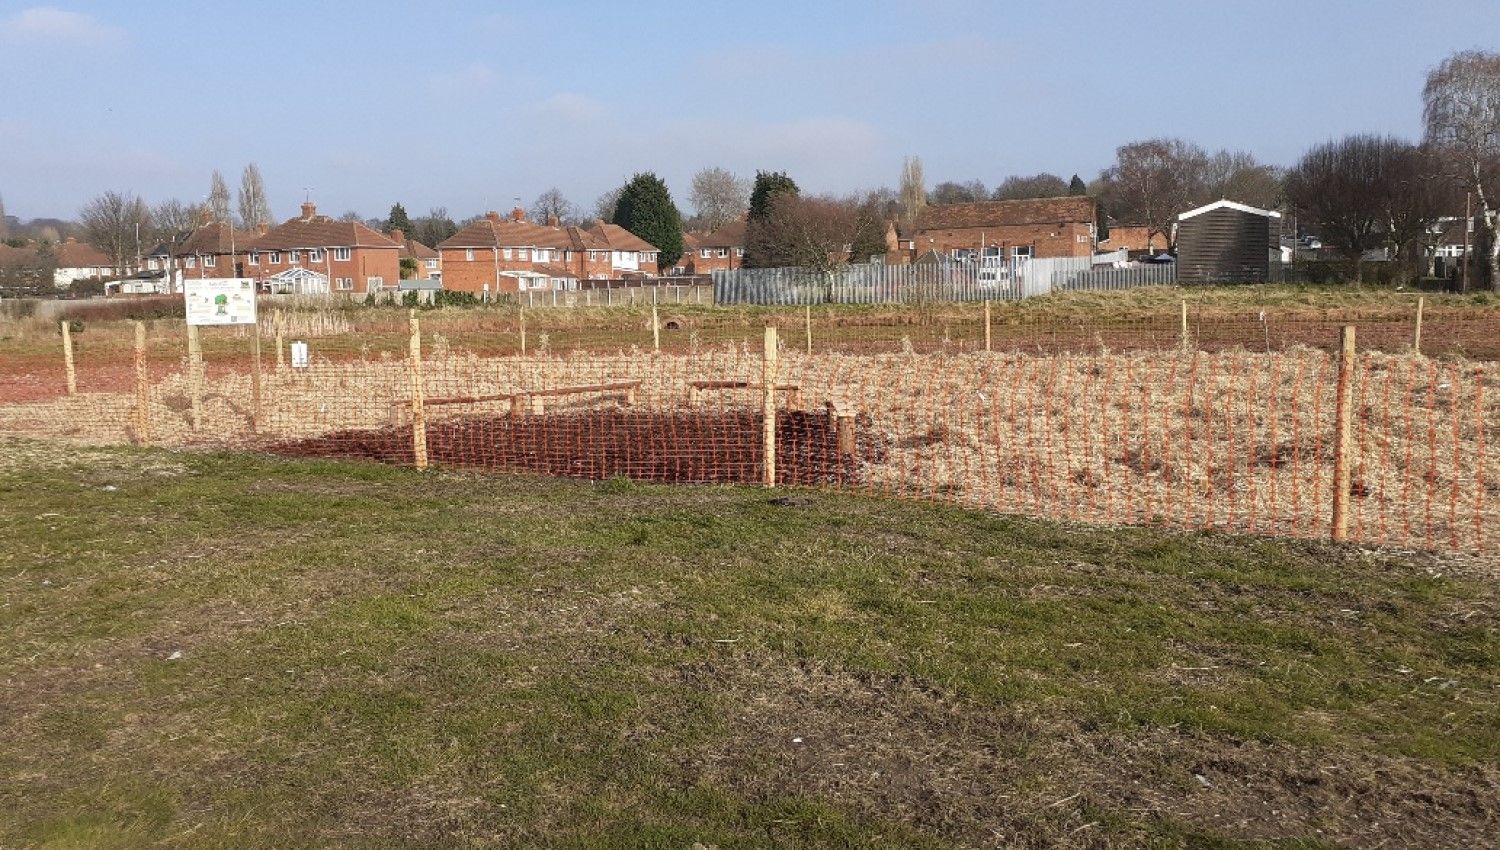 March 2021: Birmingham's first Tiny Forest is planted (Photo credit Continental Landscapes)